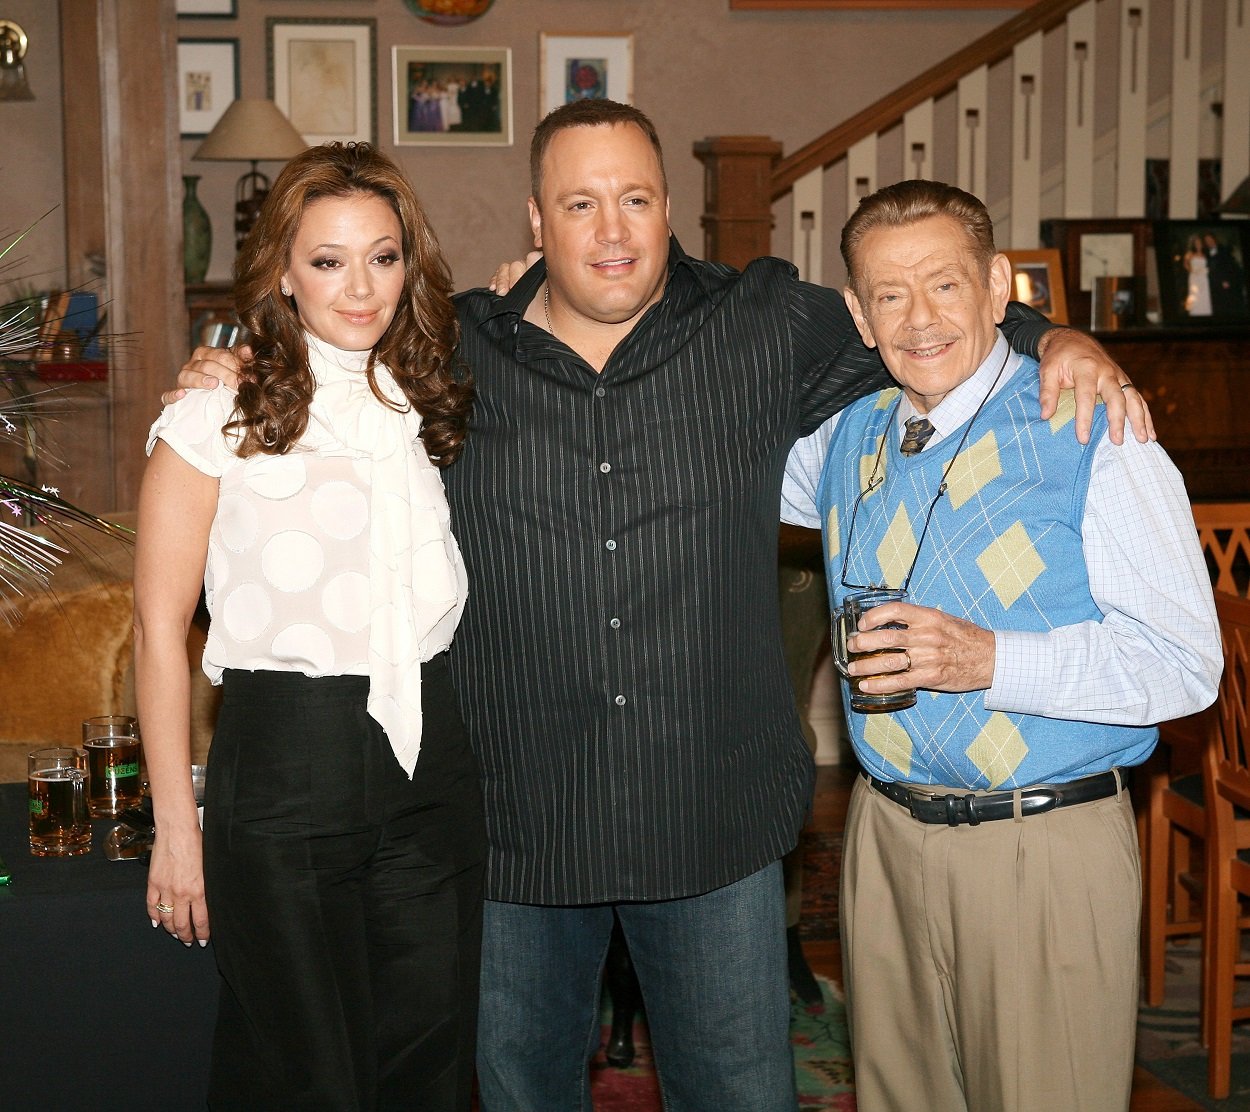 The King of Queens cast Leah Remini, Kevin James, and Jerry Stiller